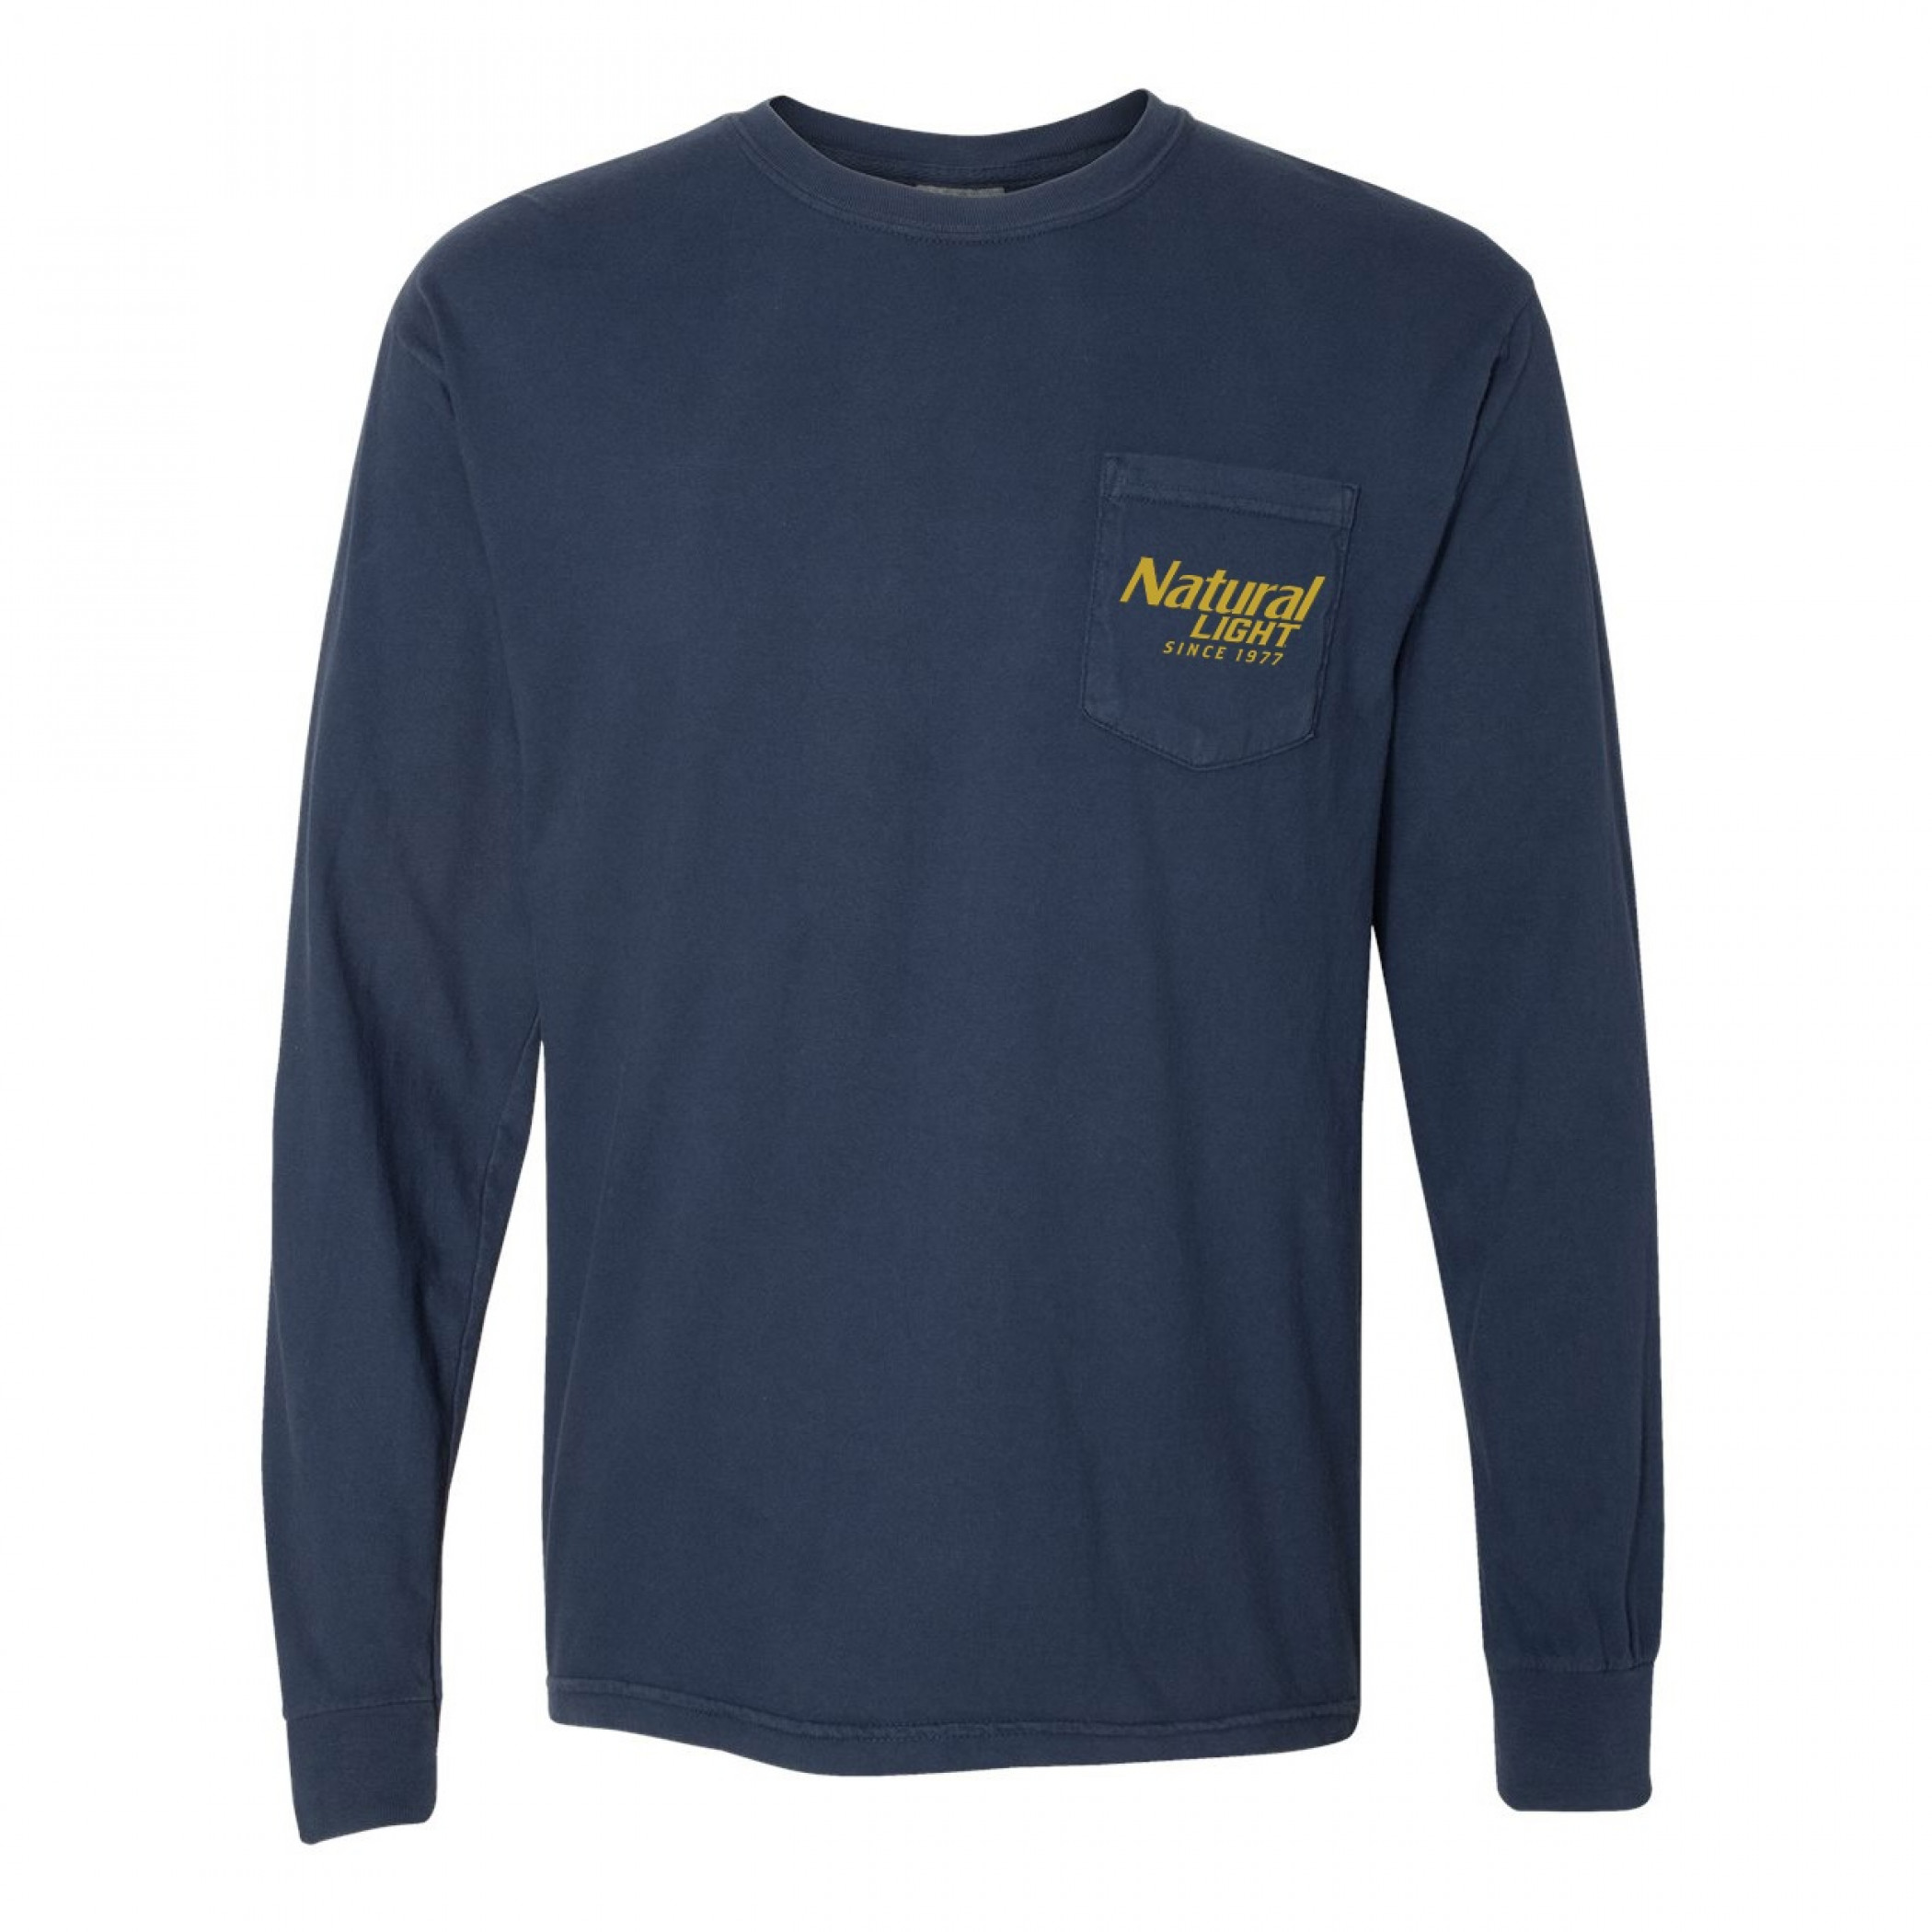 Natural Light Brewed In America Since 1977 Long Sleeve Shirt